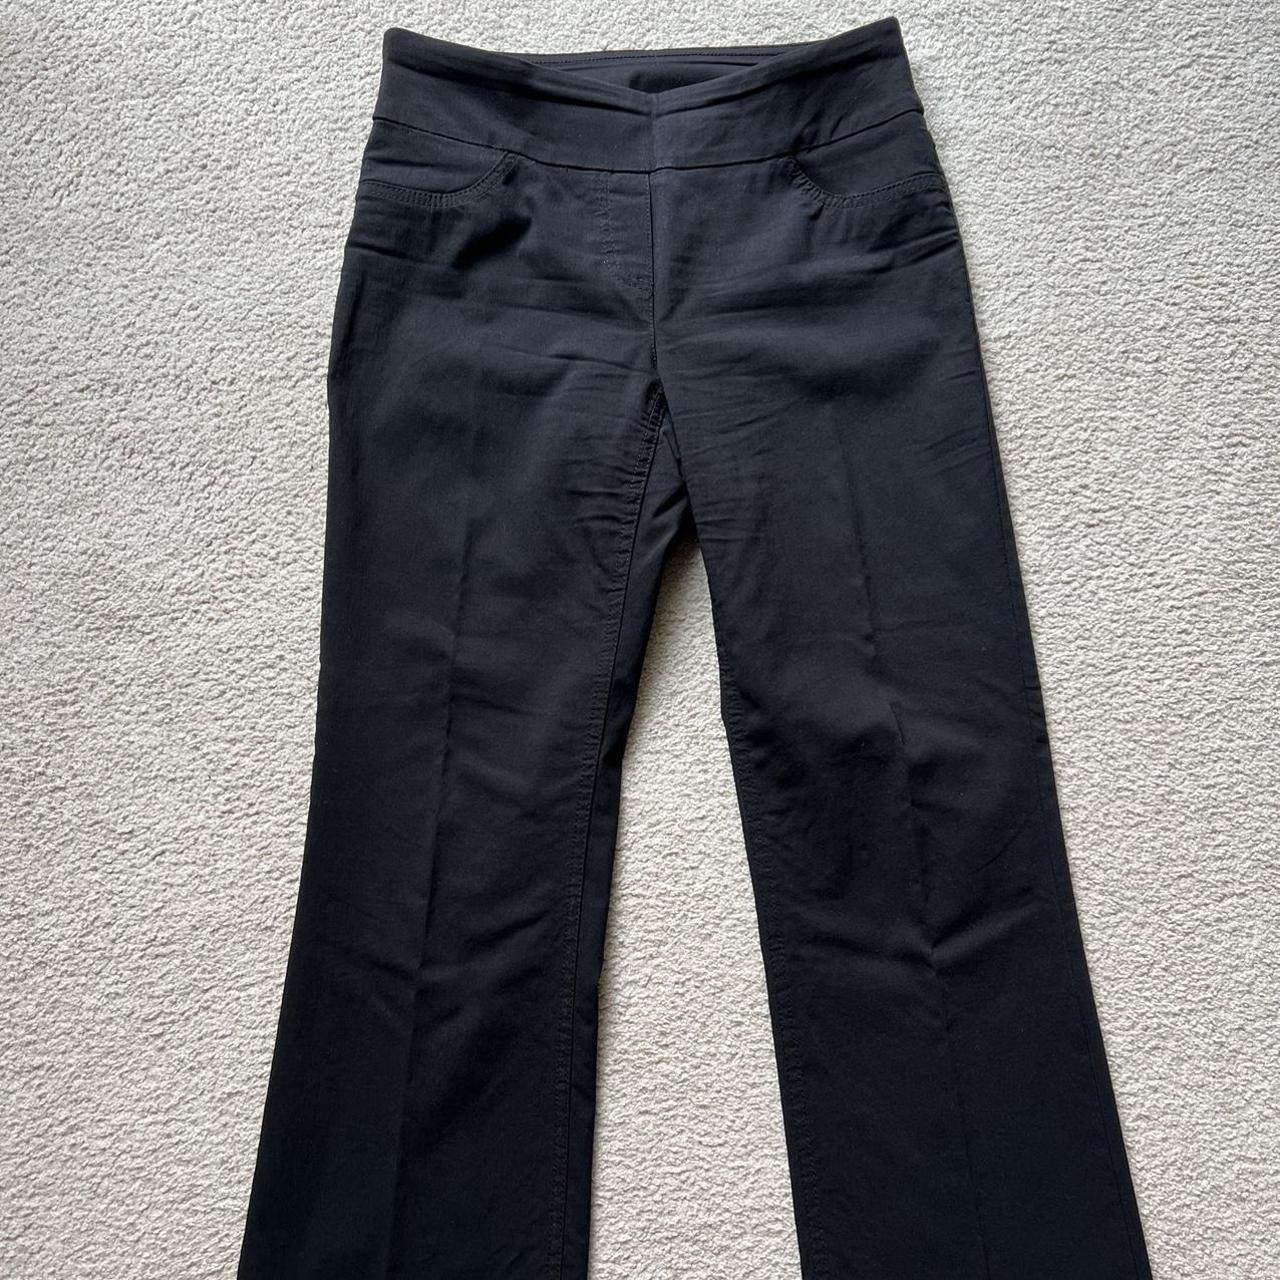 Westbound Women's Pants